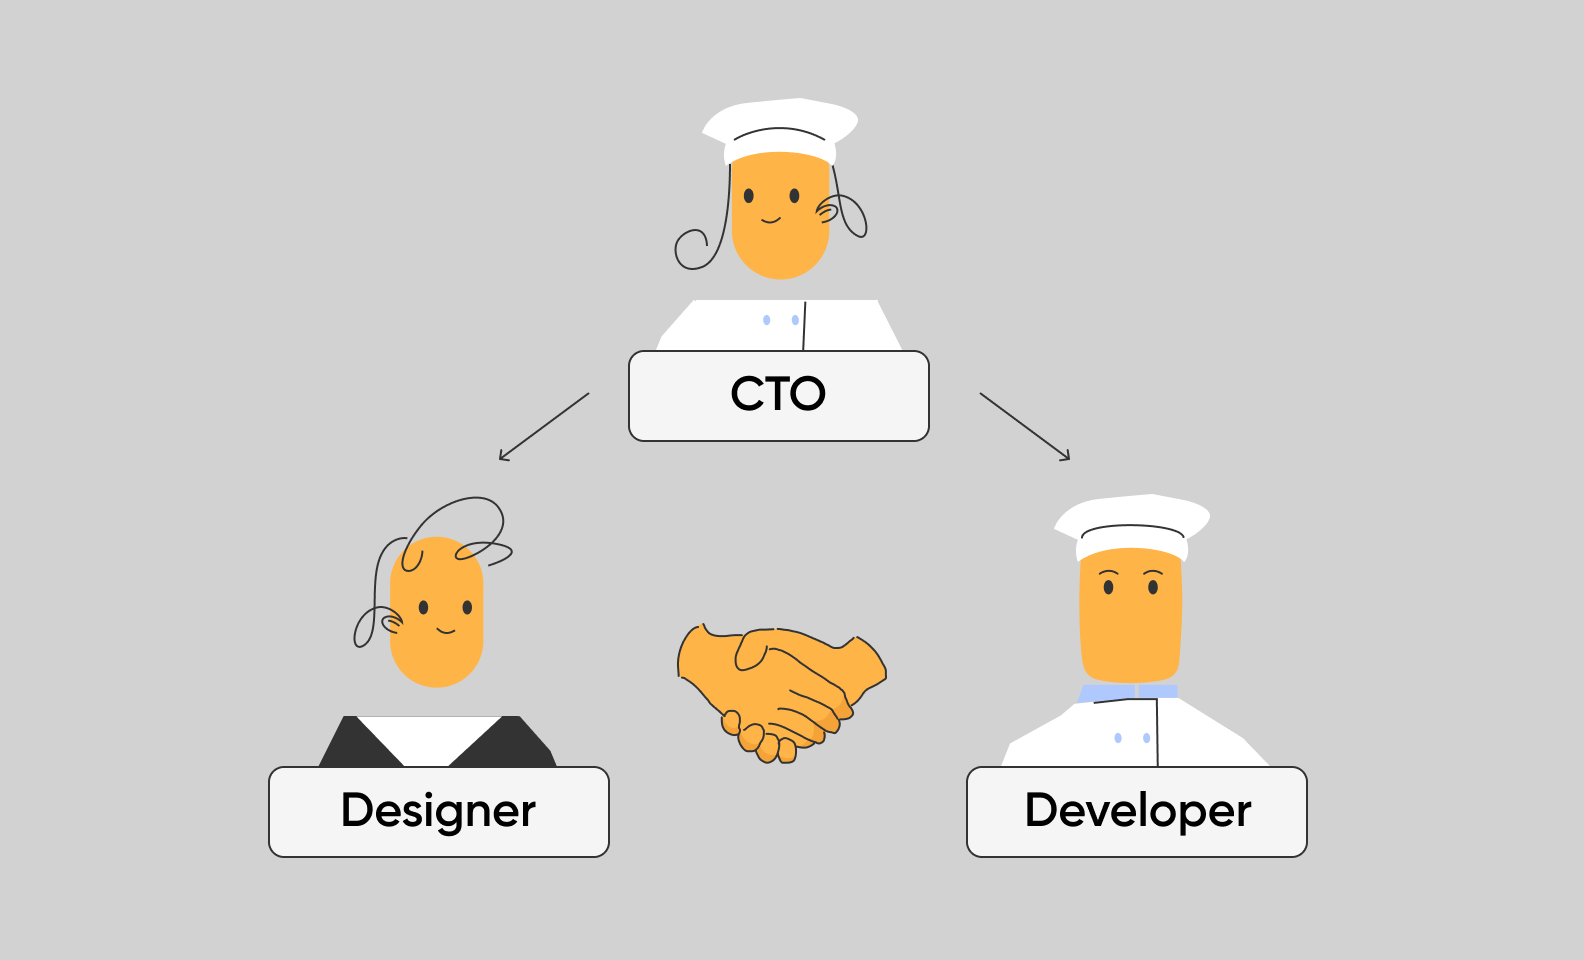 A CTO enabling communication between designers and developers